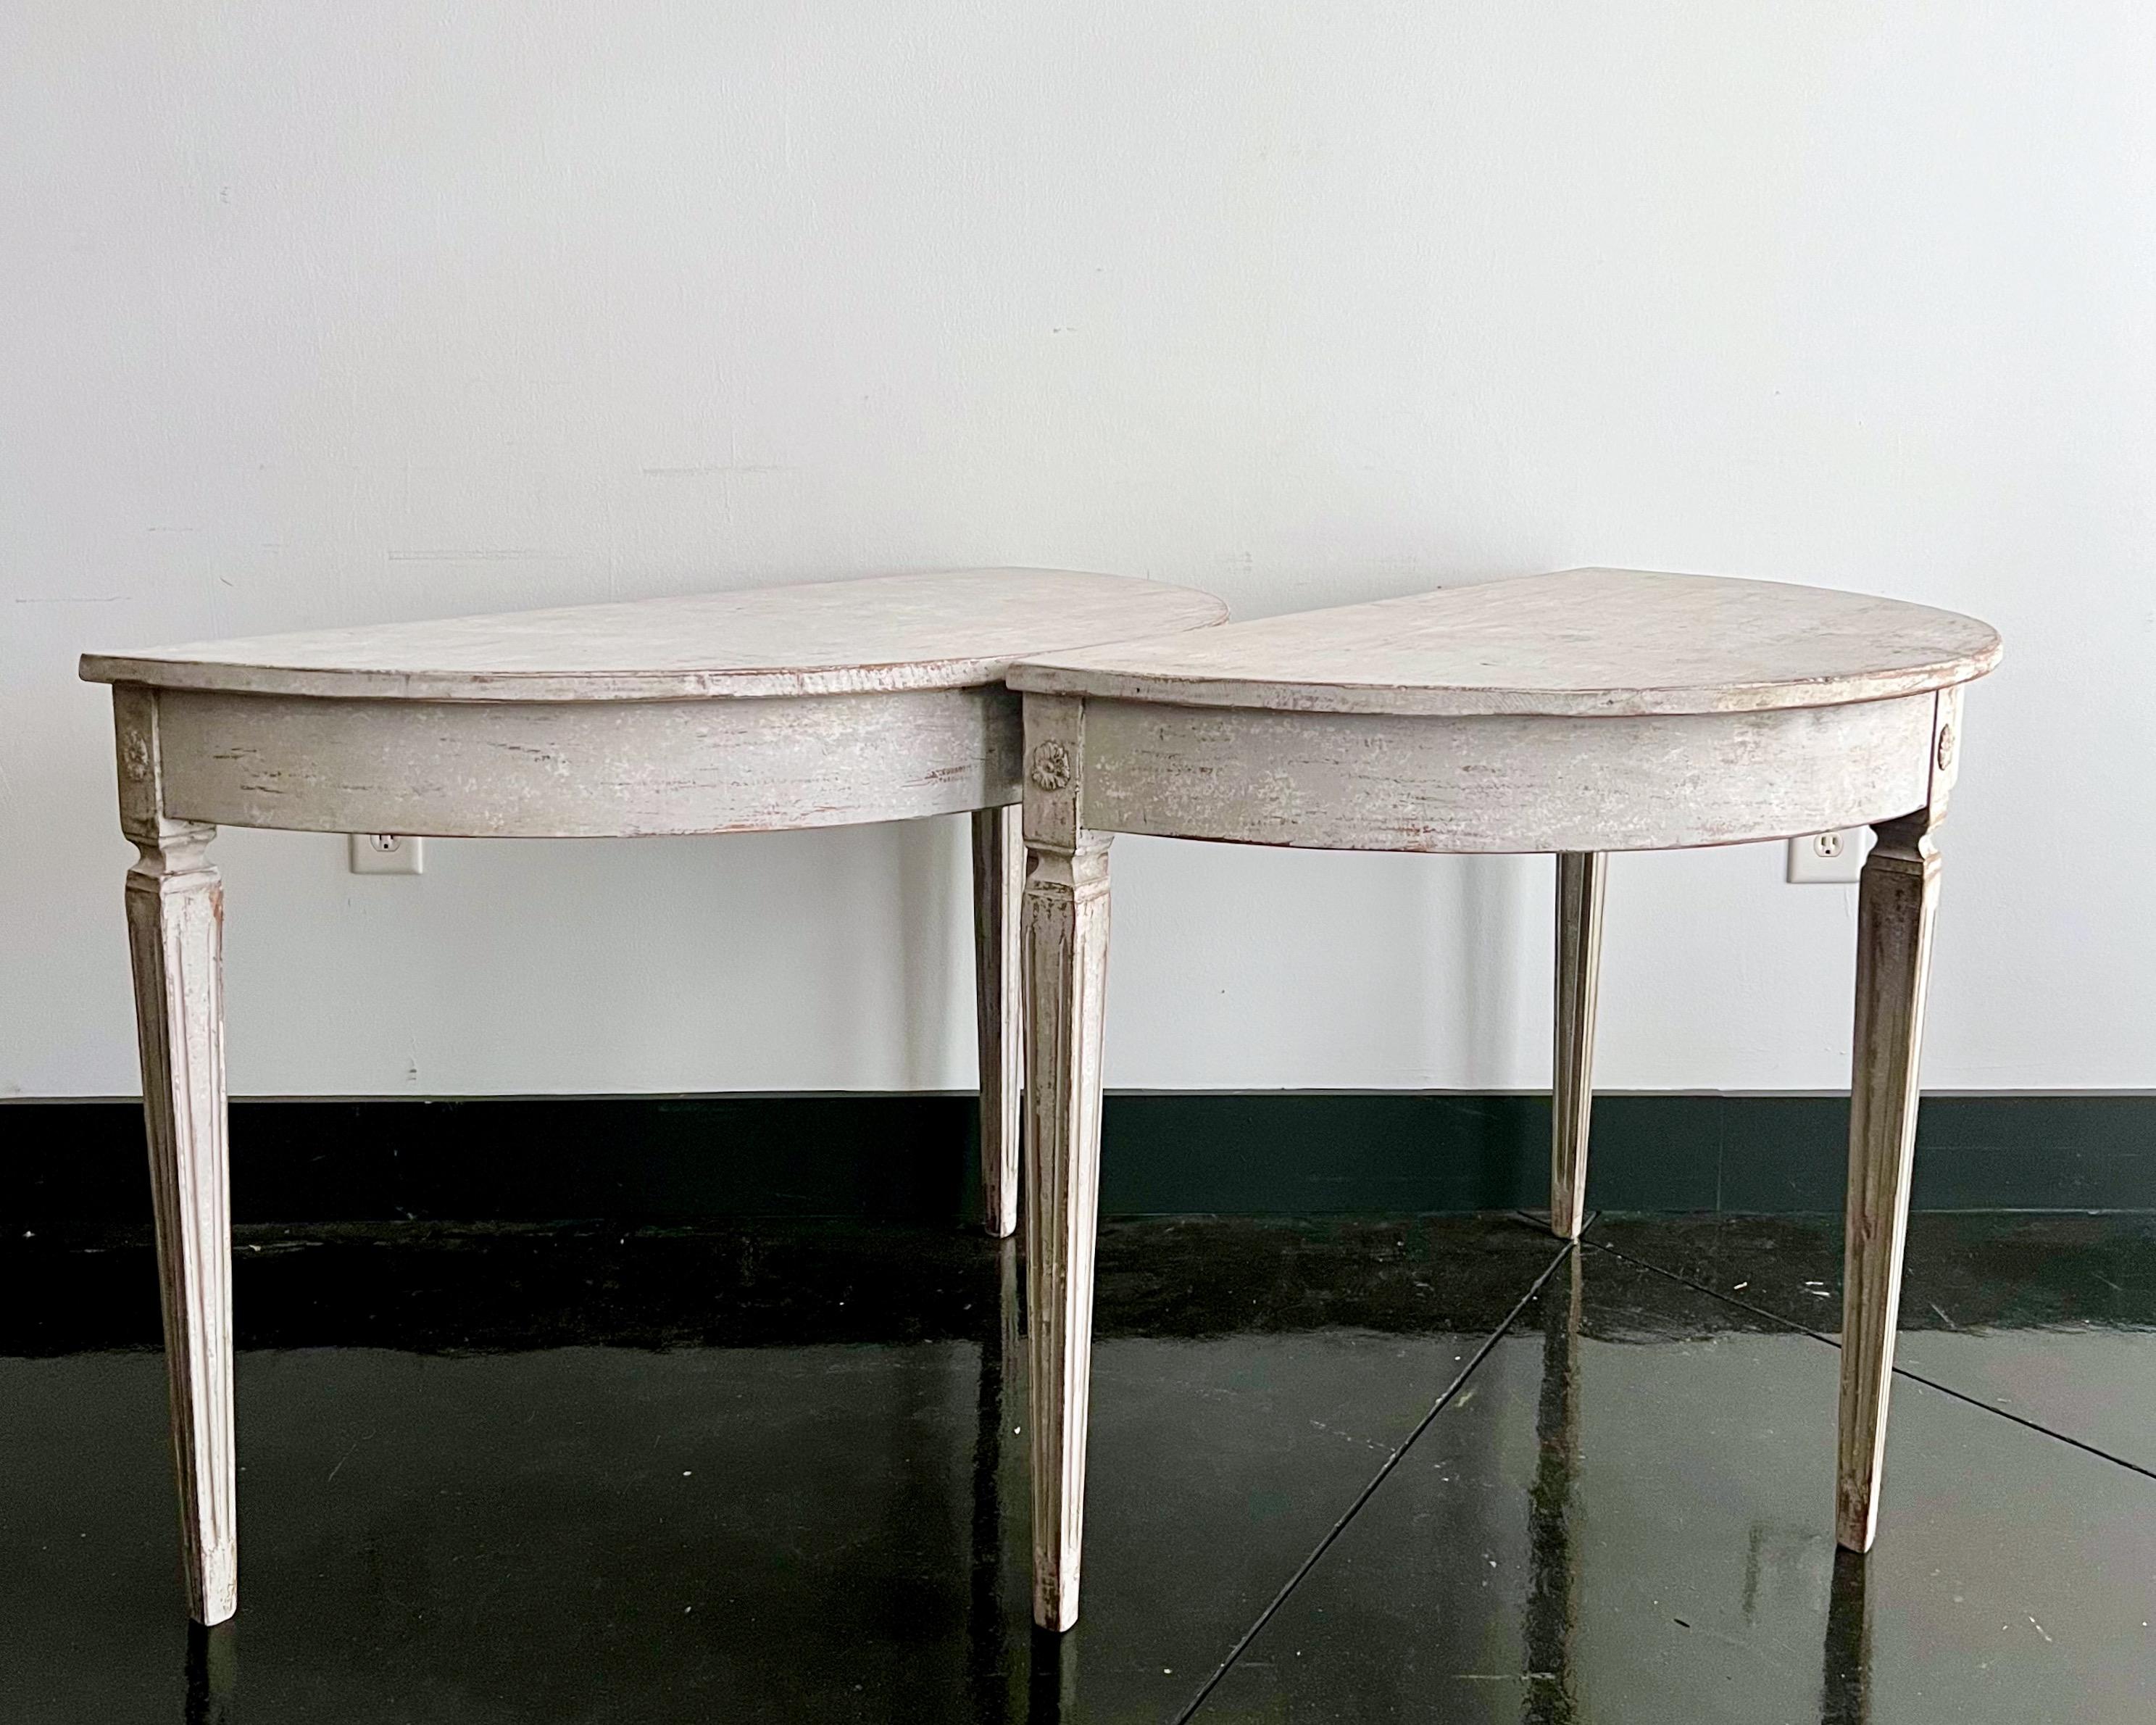 Pair of Swedish Neoclassical period demilune console tables with wide rounded apron and florets on the corner blocks. Elegant tapered and fluted legs.
Many layers of newer paint scraped to its most original finish.
Stockholm, Sweden, circa 1820.